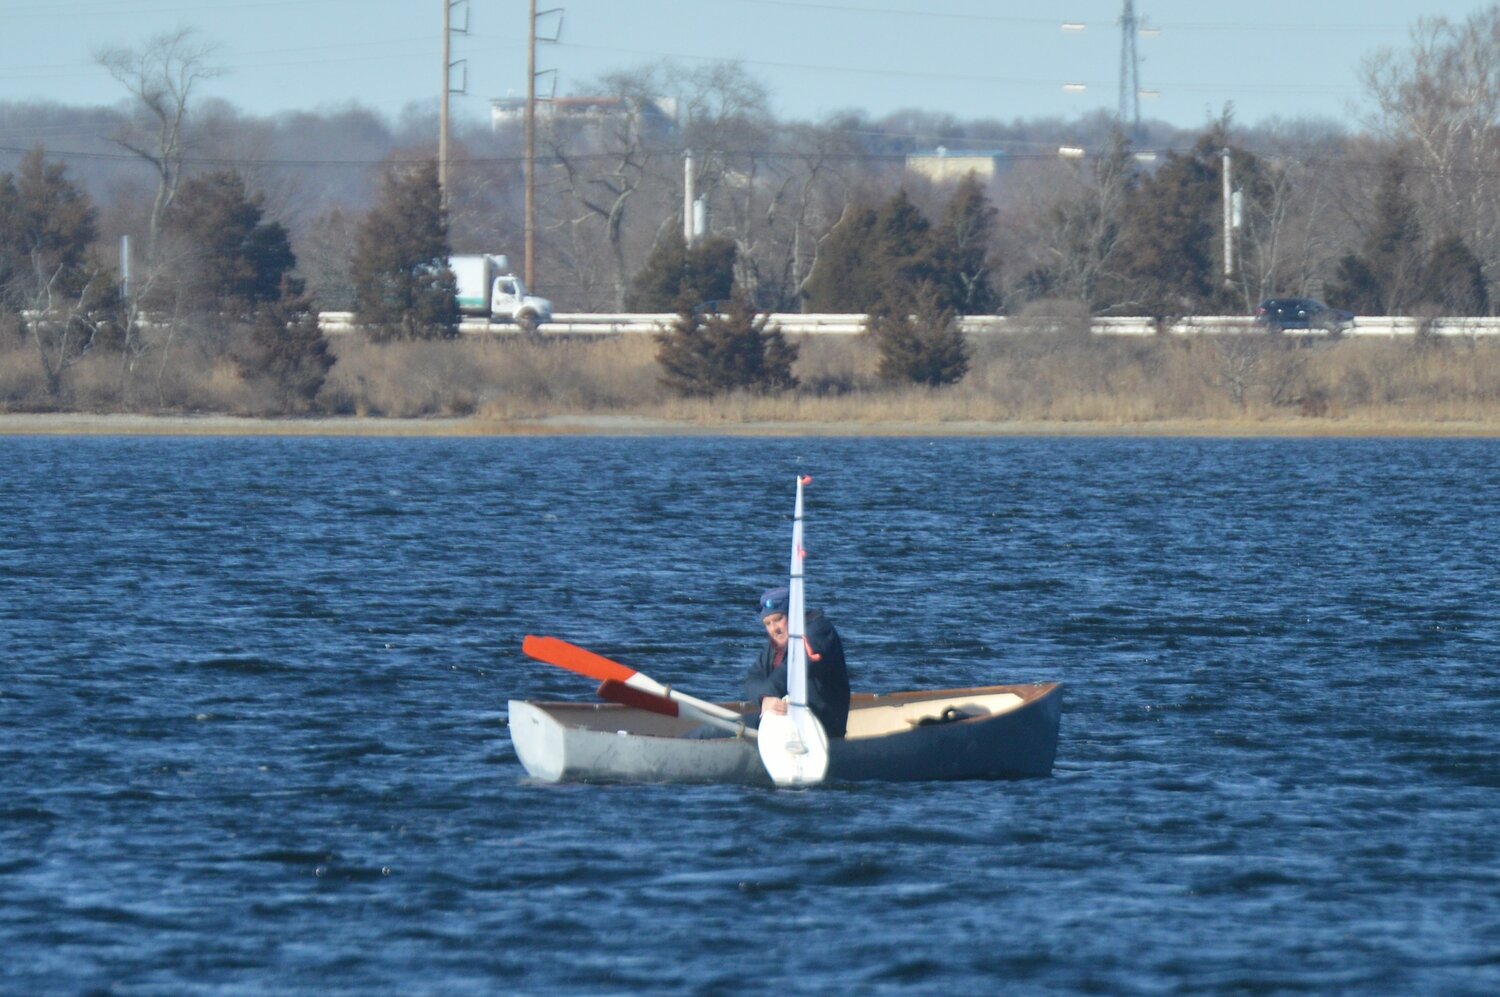 Rick Bassler grabs a boat that drifted outside the range of its racer’s remote control.